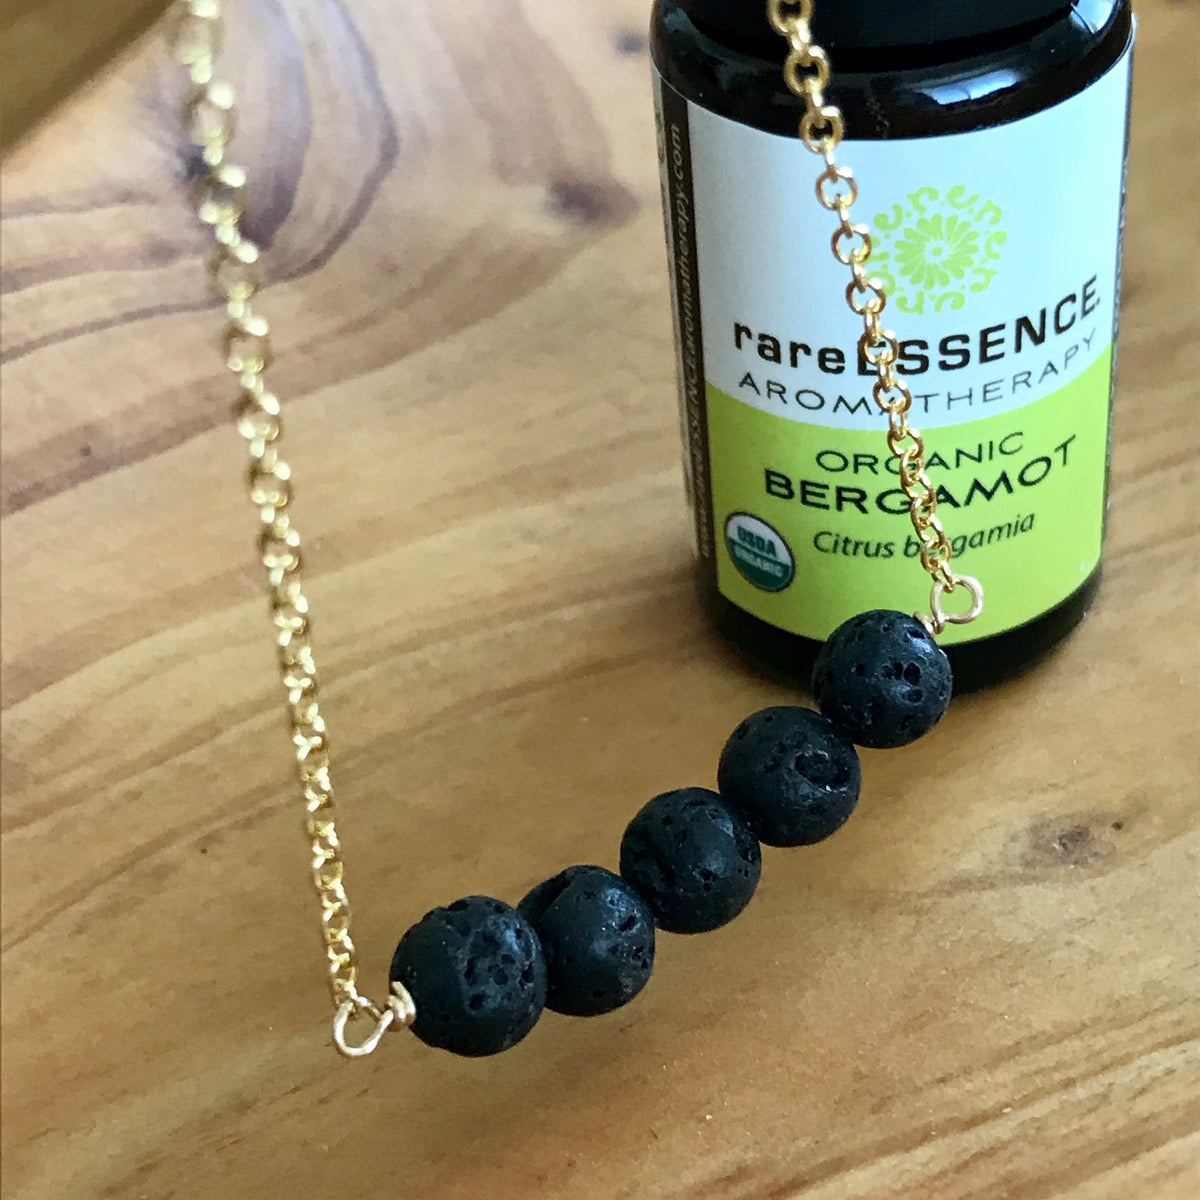 Gold Necklace with Black Lava Rocks for Essential Oil Aromatherapy. Pictured with Organic Bergamot Essential Oil by rareESSENCE.